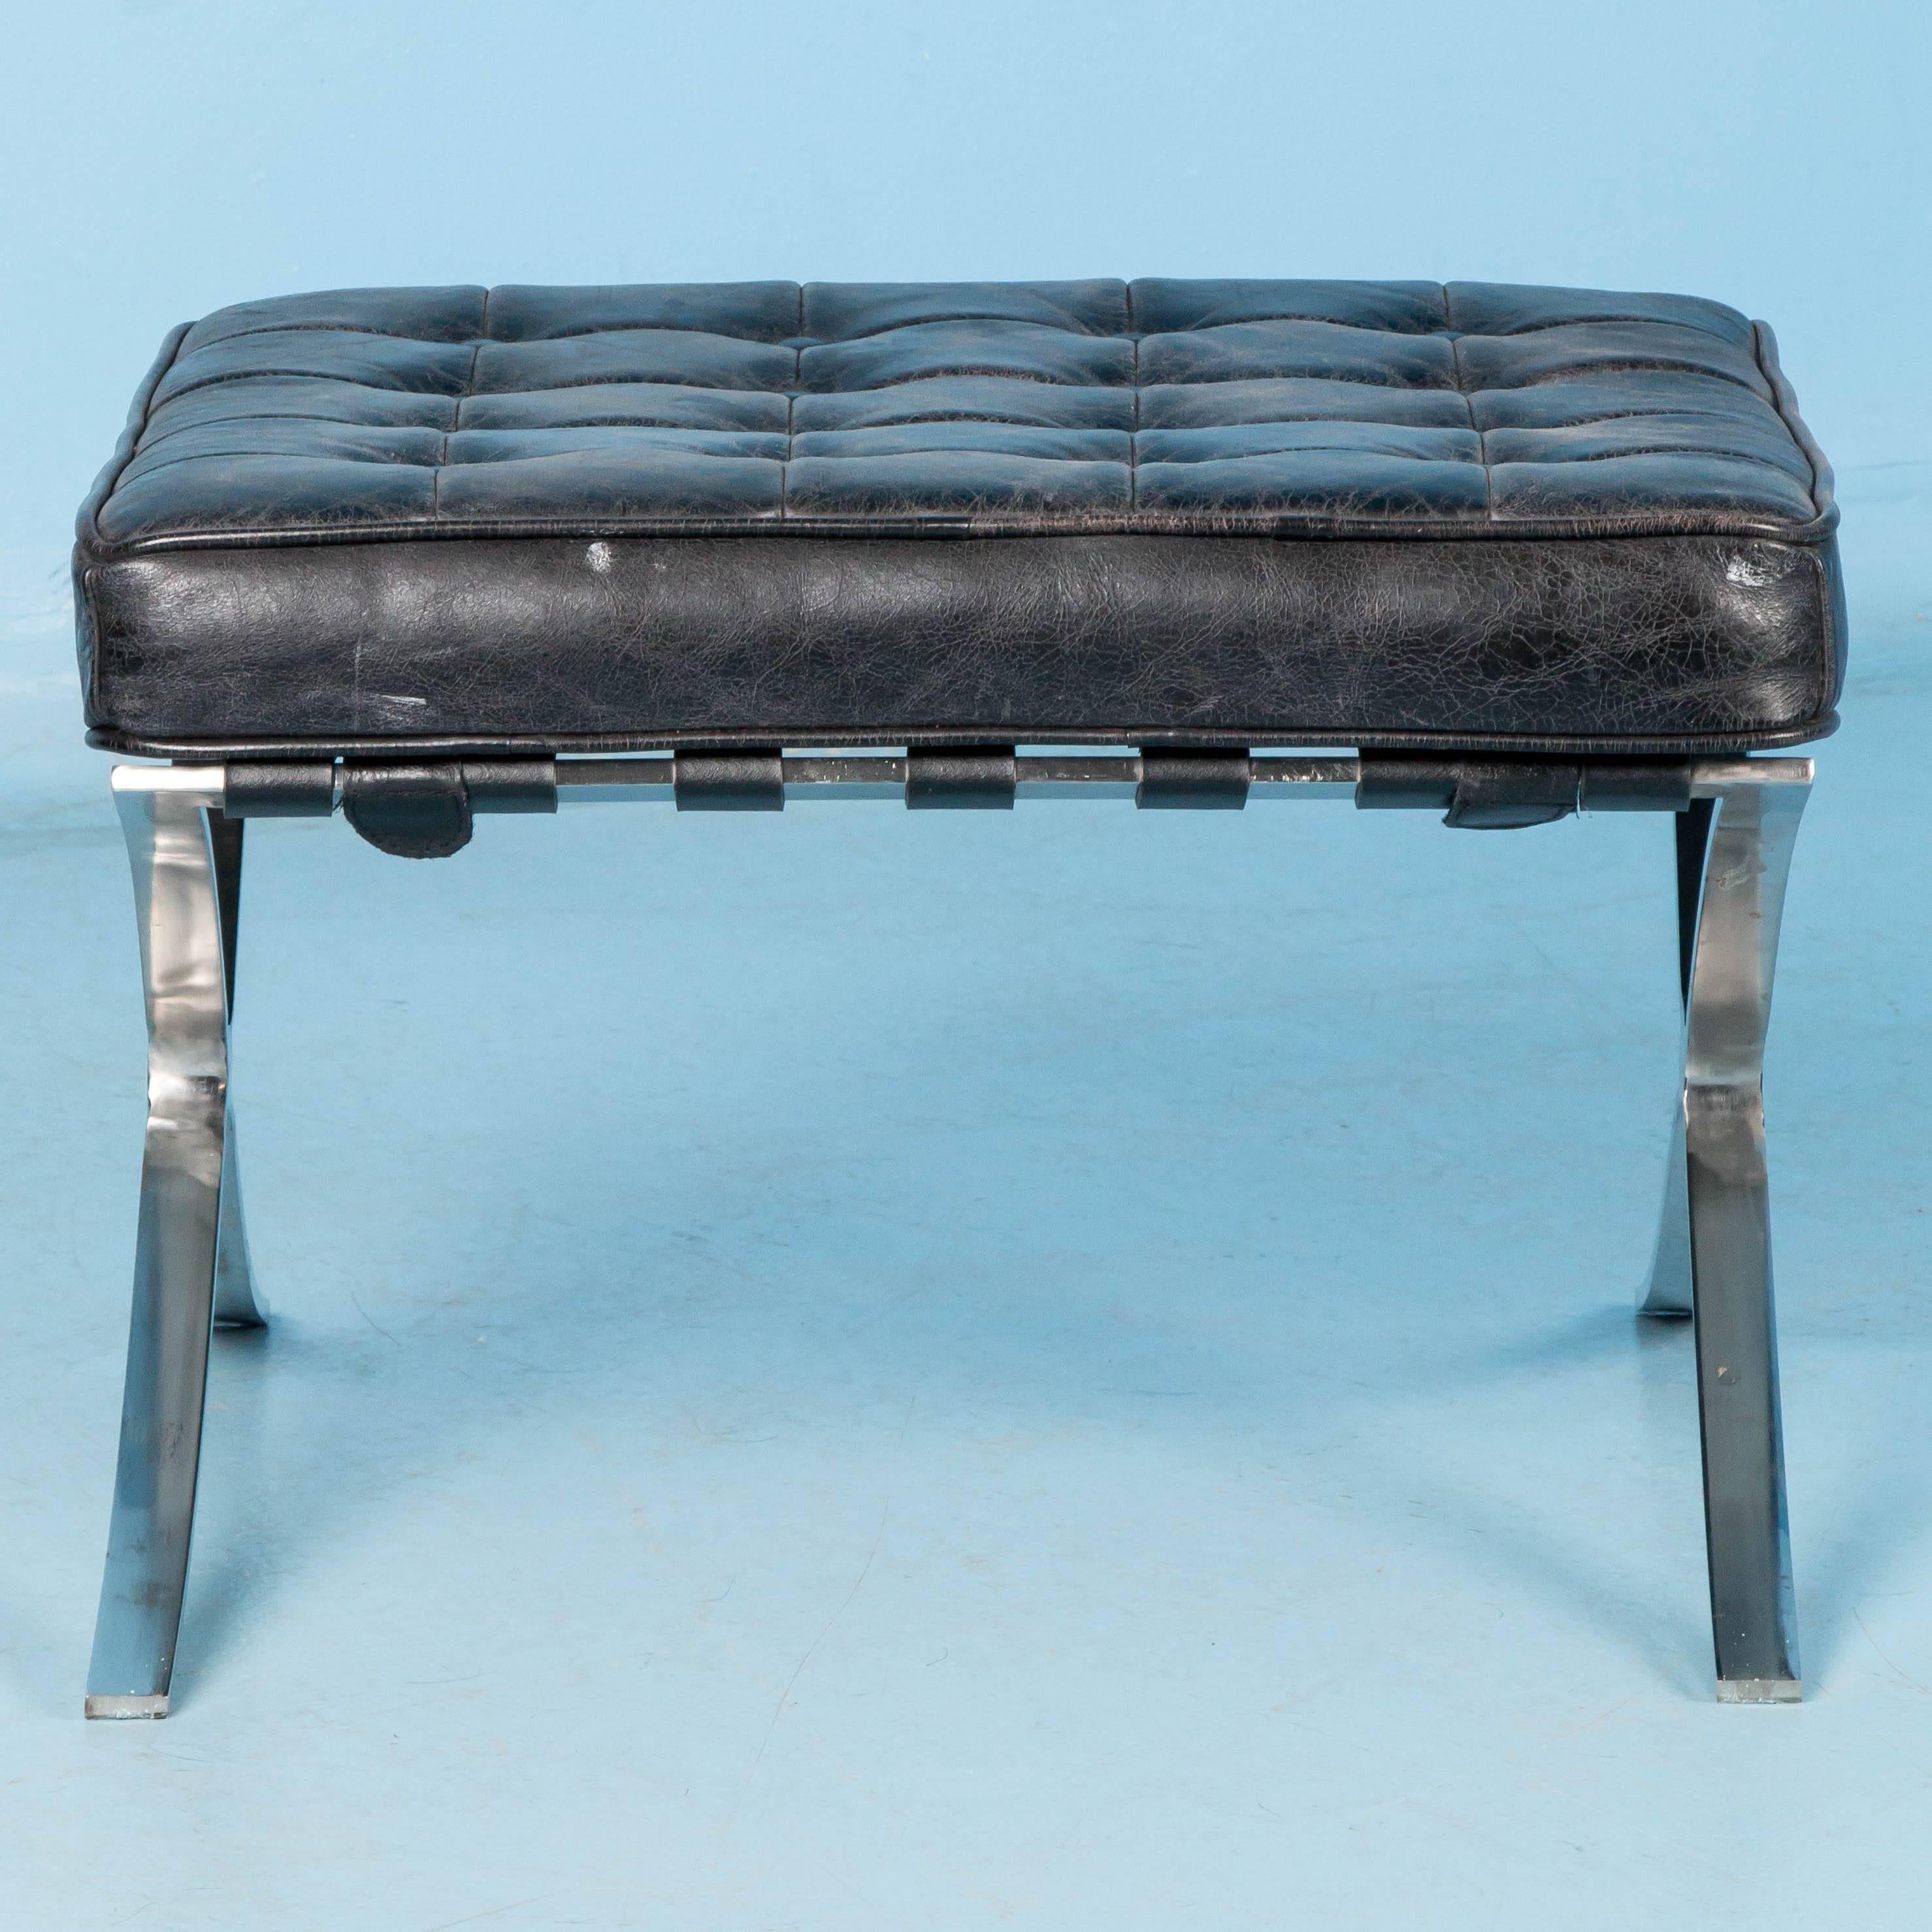 This Barcelona style black leather ottoman has a vintage look, chrome legs and a tufted seat. This matches a pair of Barcelona style chairs that are also available. Each of the chairs and the individual ottoman are sold separately.